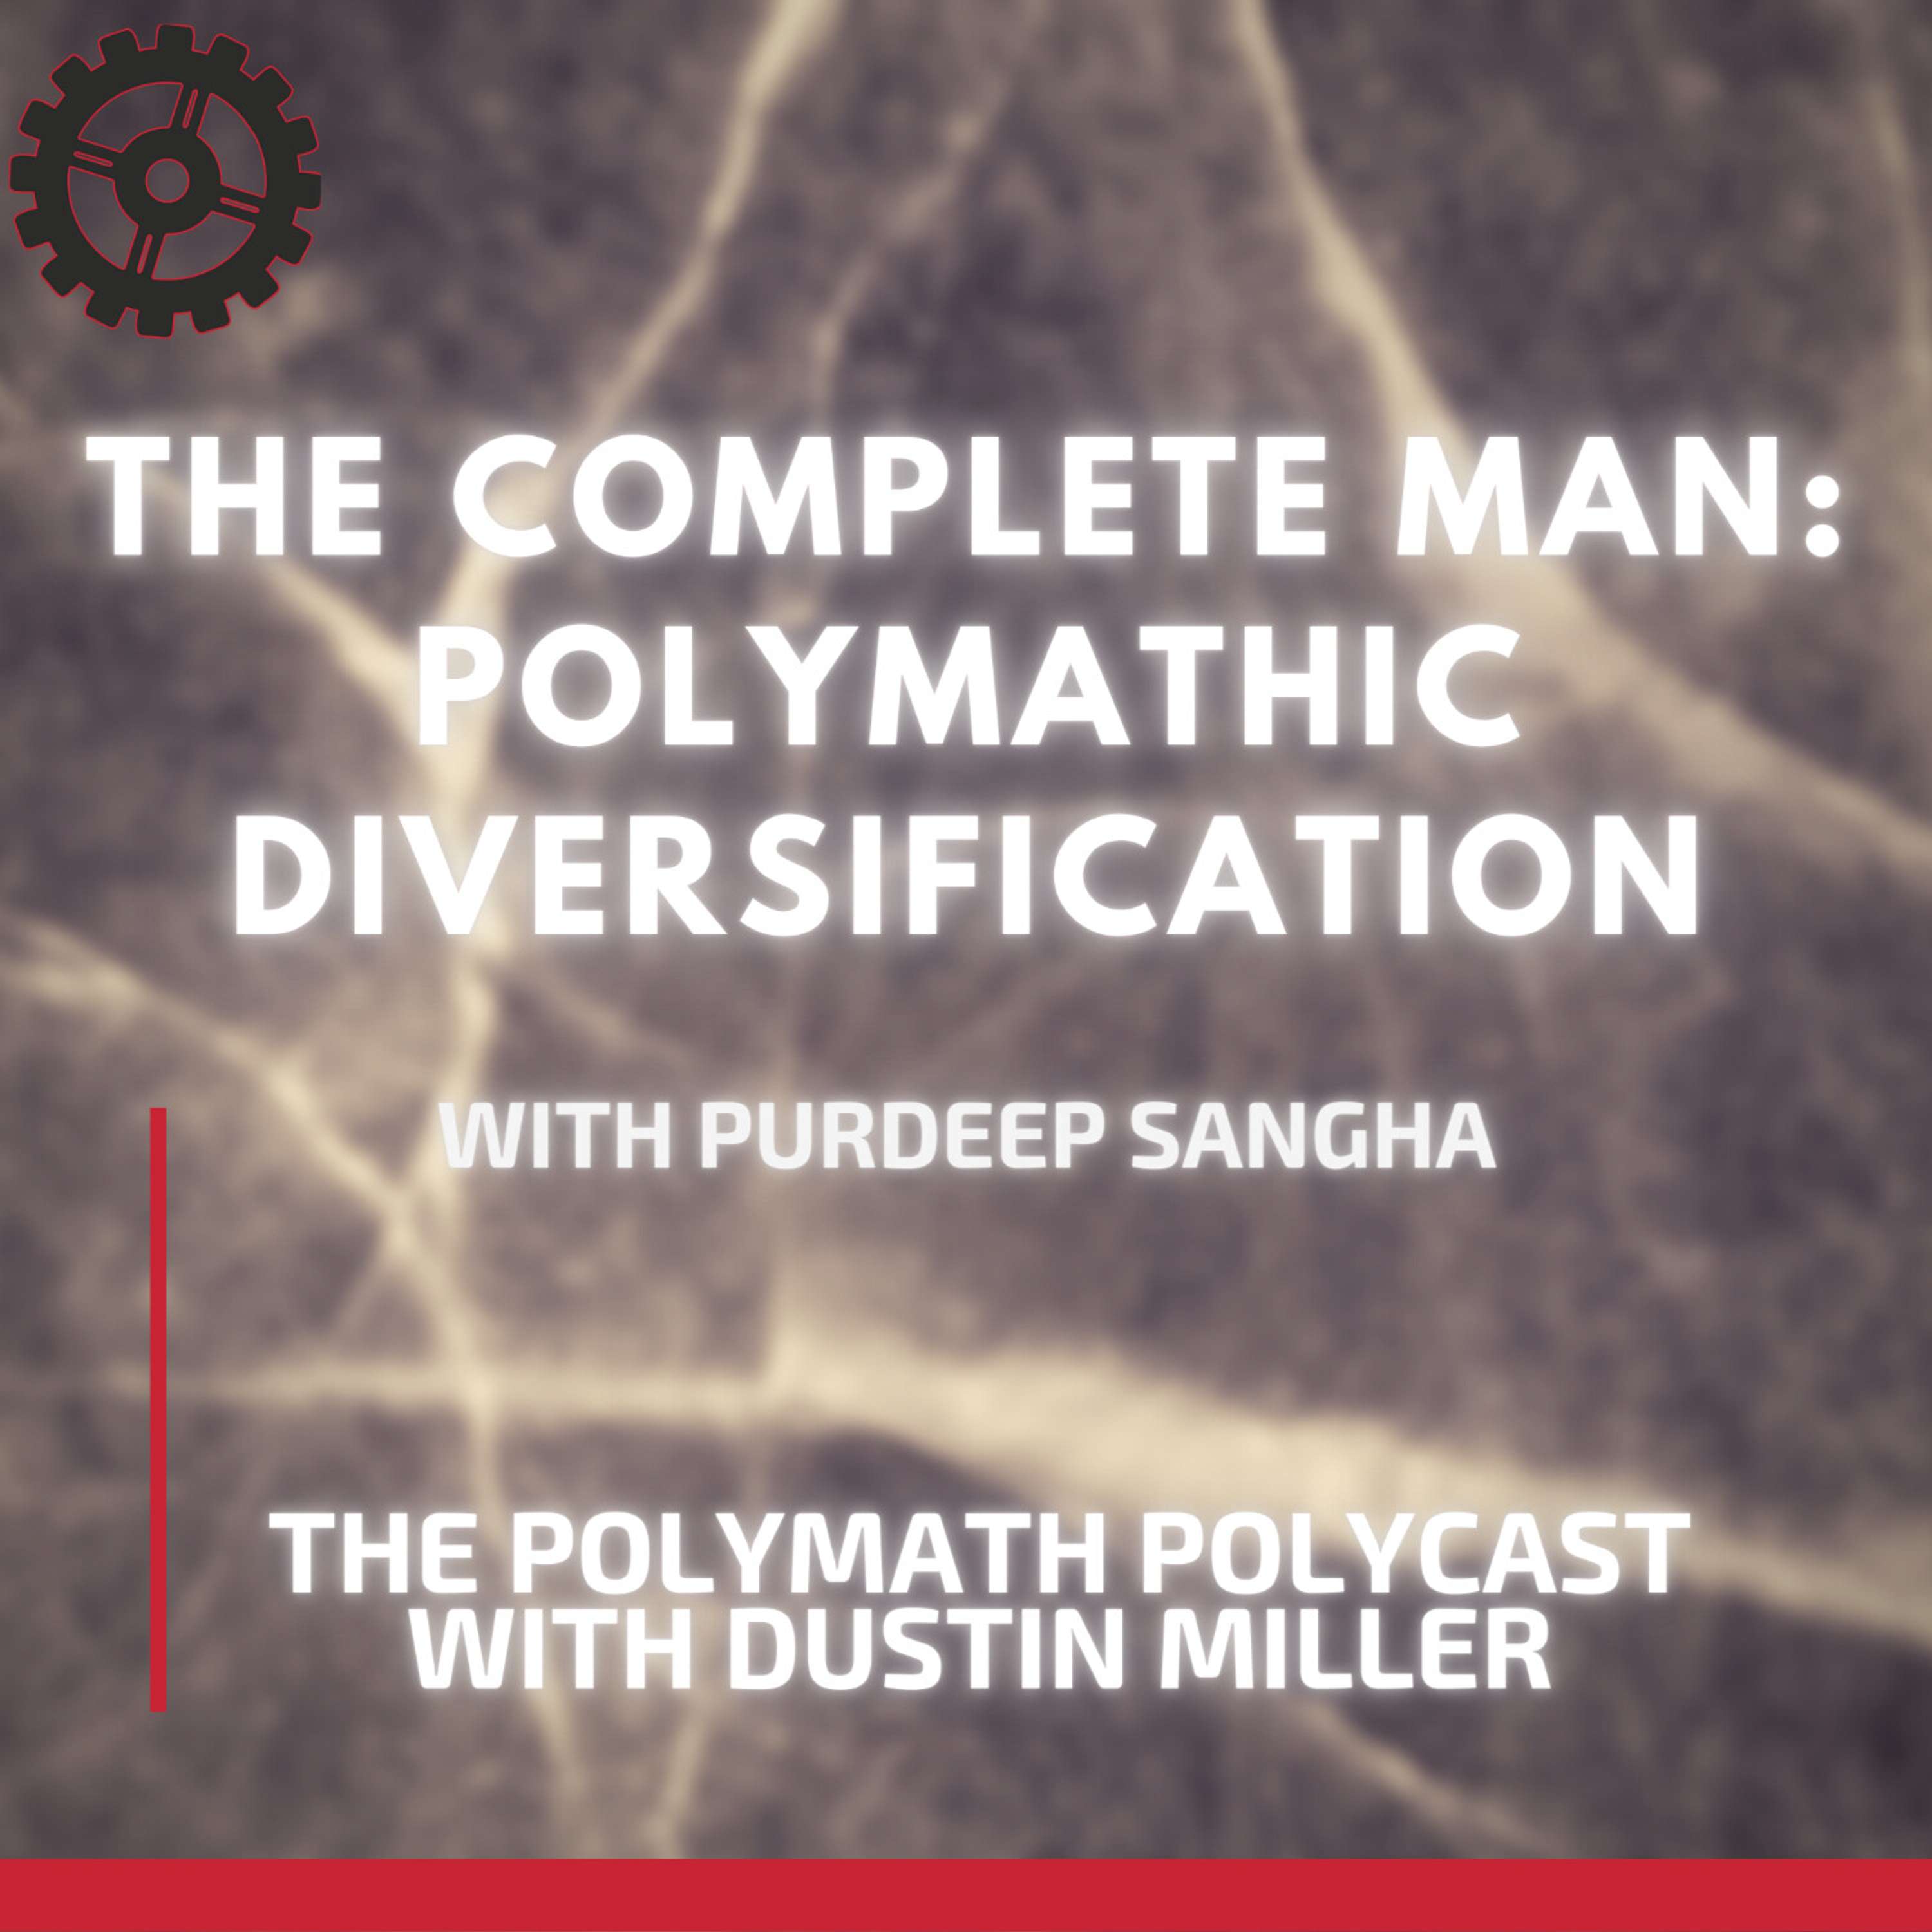 The Complete Man: Polymathic Diversification with Purdeep Sangha [Interview]